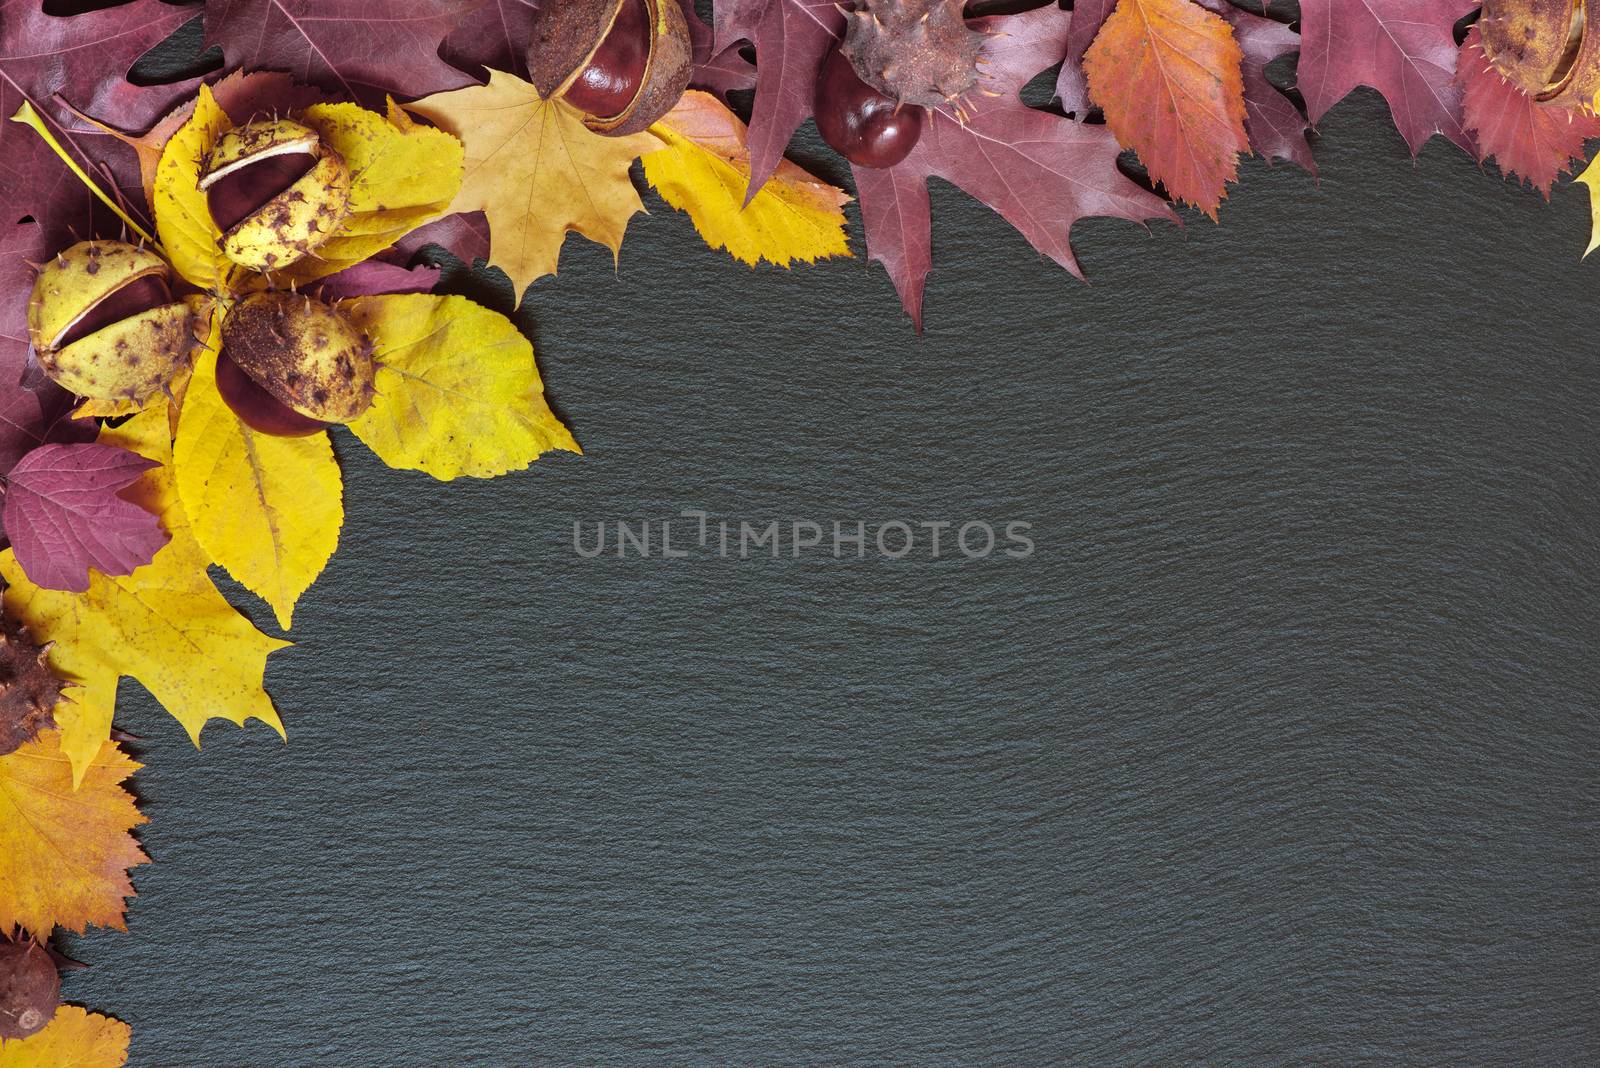 Fall frame from red and yellow autumn leaves on a background of black stone with copy-space